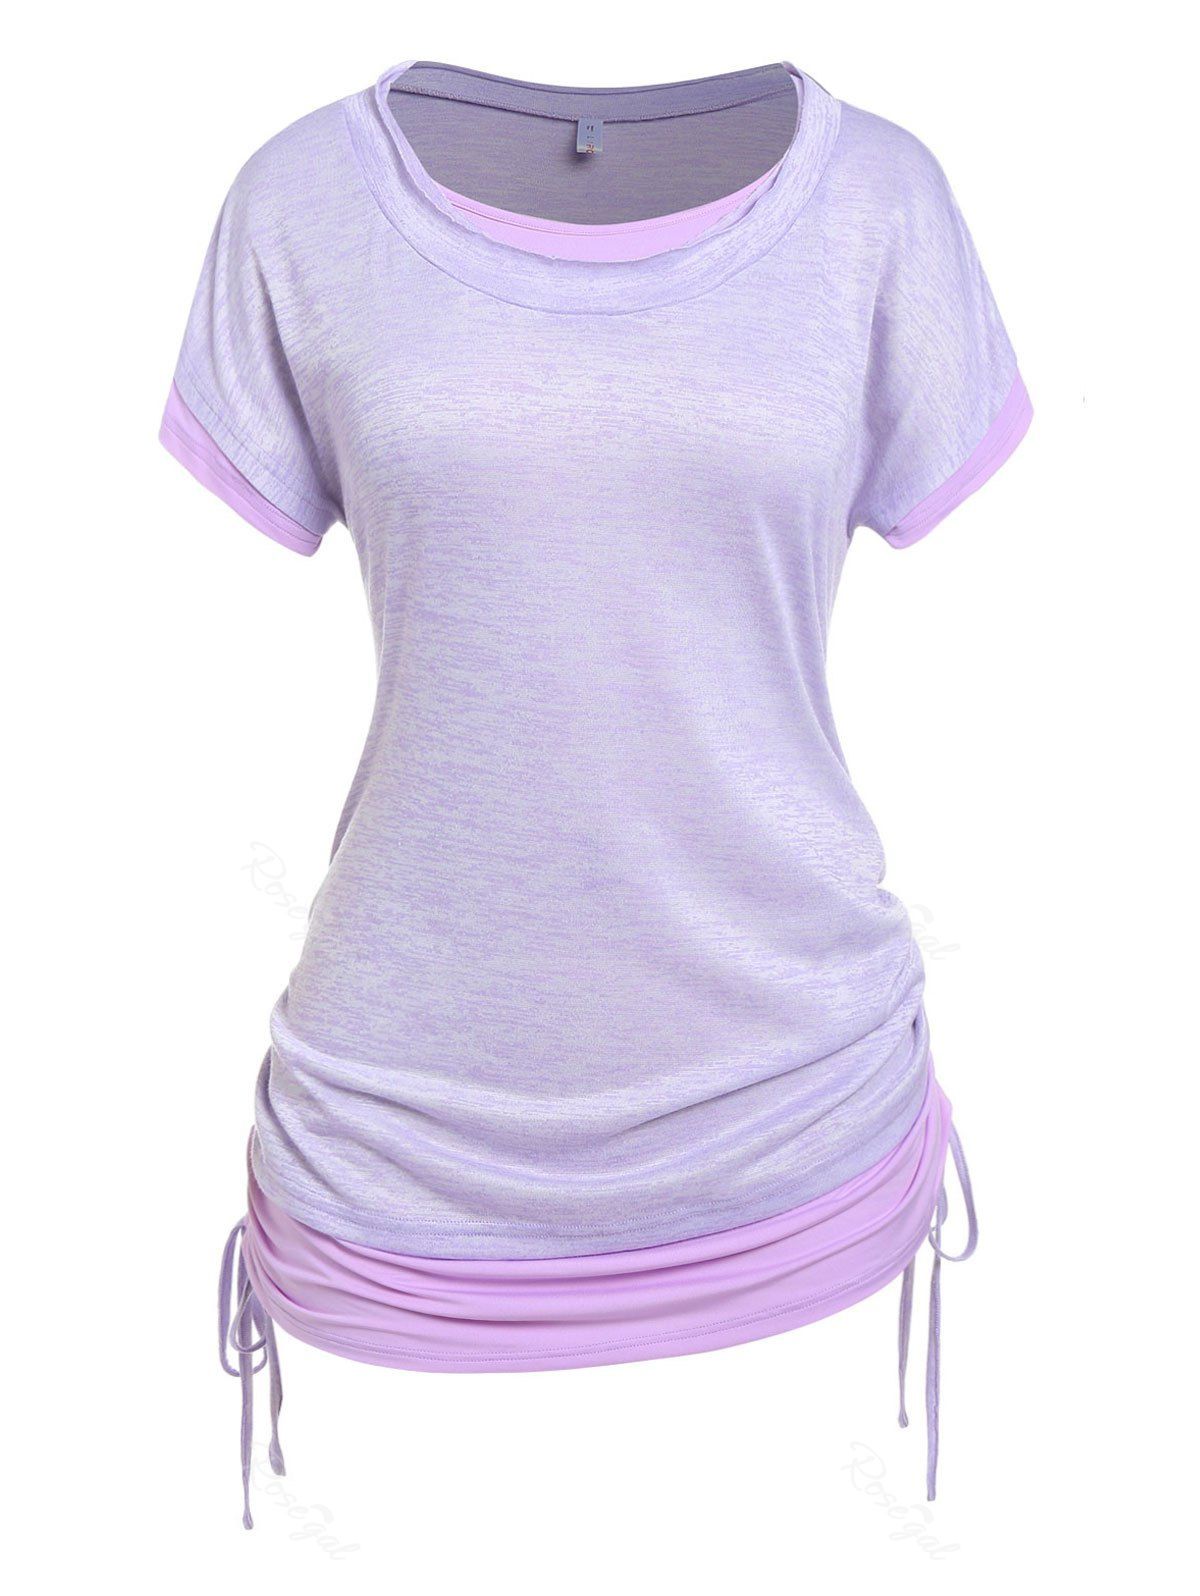 Chic Plus Size & Curve 2 in 1 Cinched Tee  